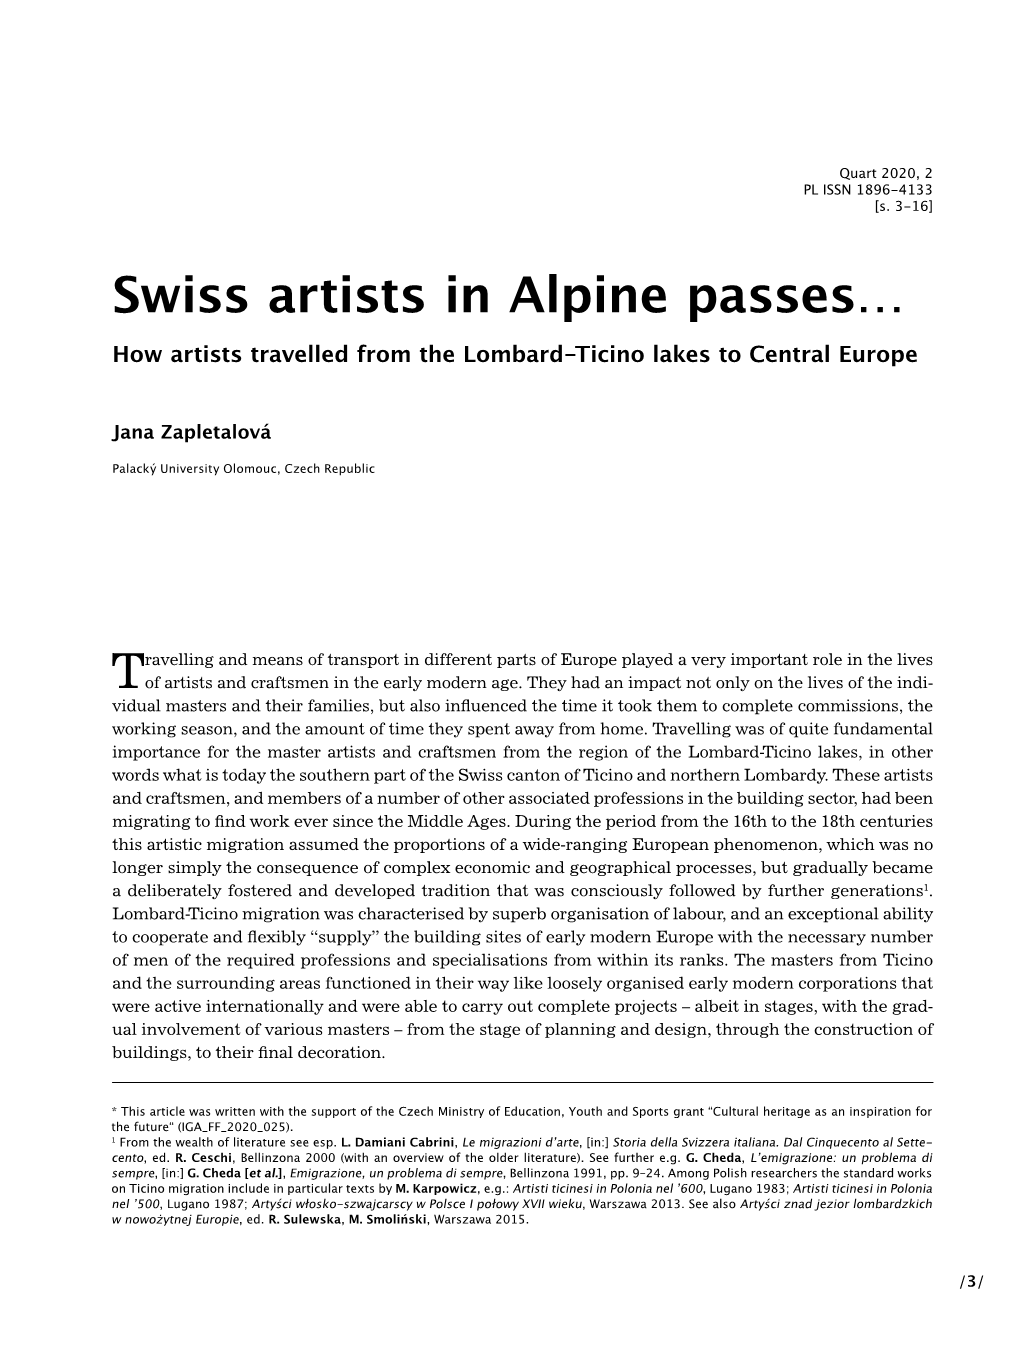 Swiss Artists in Alpine Passes… How Artists Travelled from the Lombard-Ticino Lakes to Central Europe